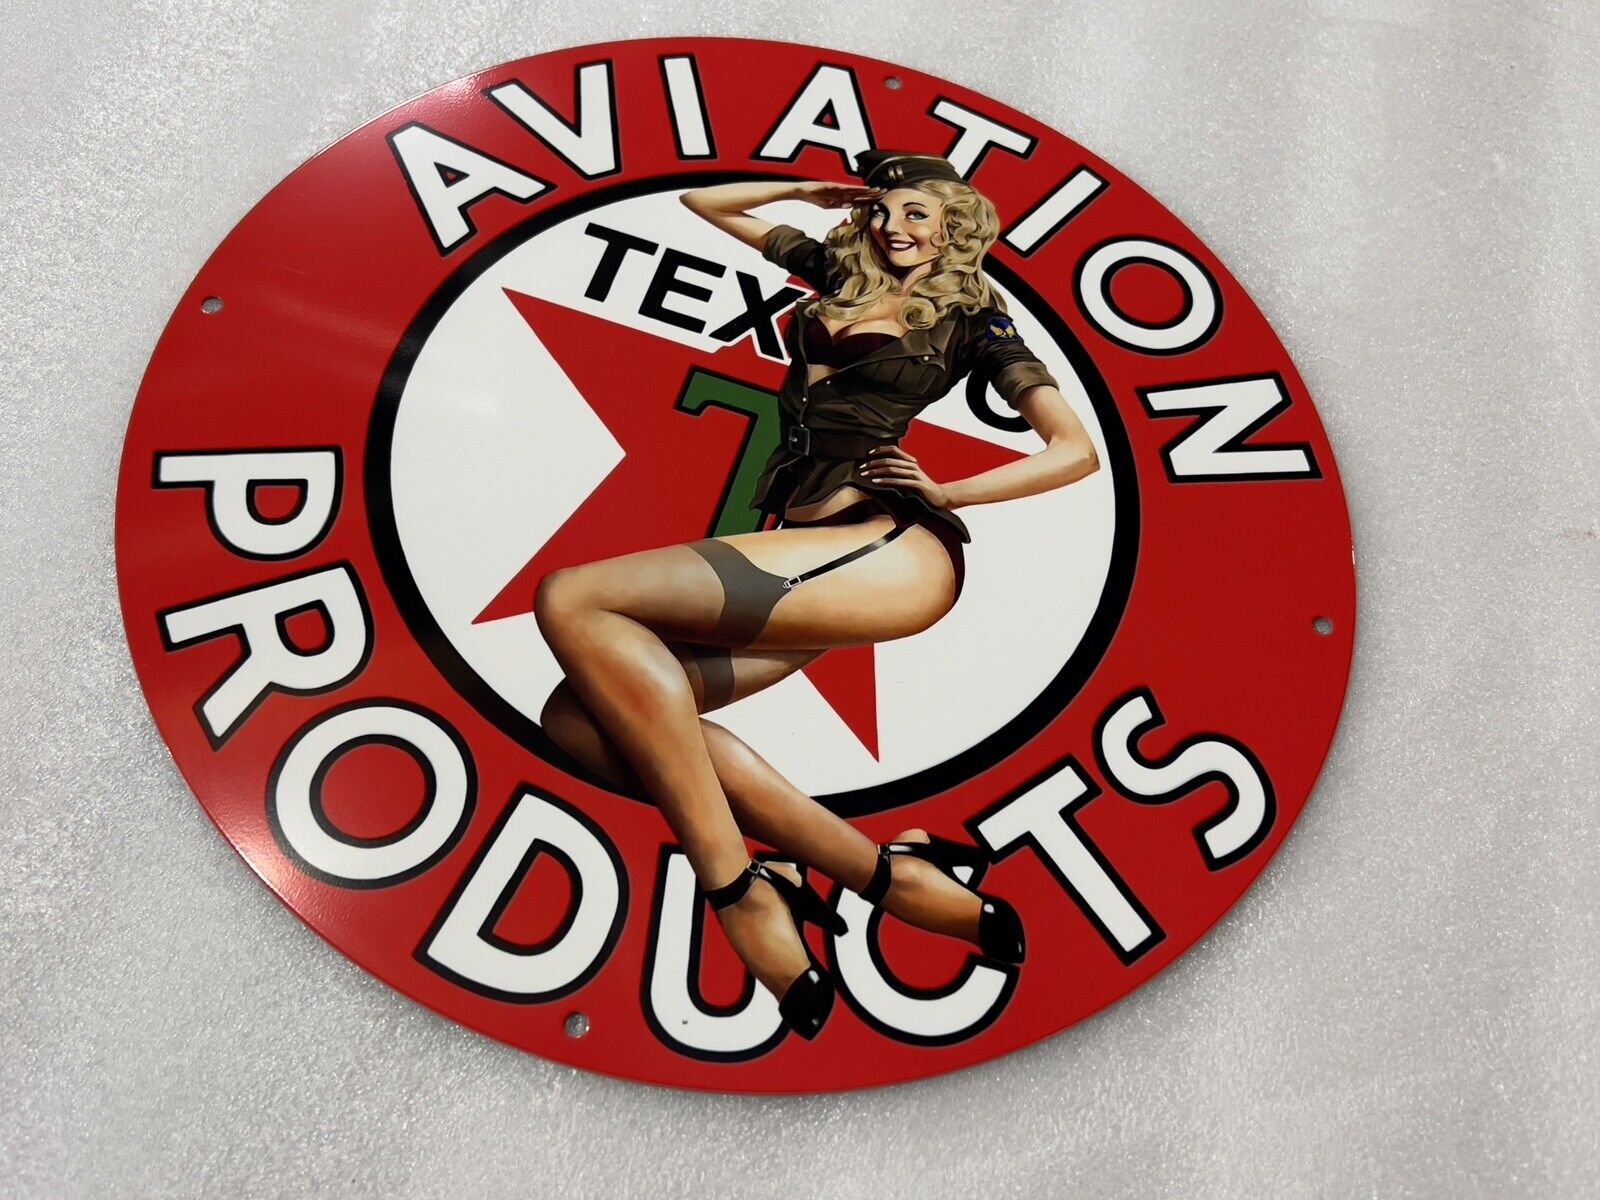 12in Texaco Gasoline Aviation Girl Gas Vintage Style Heavy Steel Sign Pump Plate